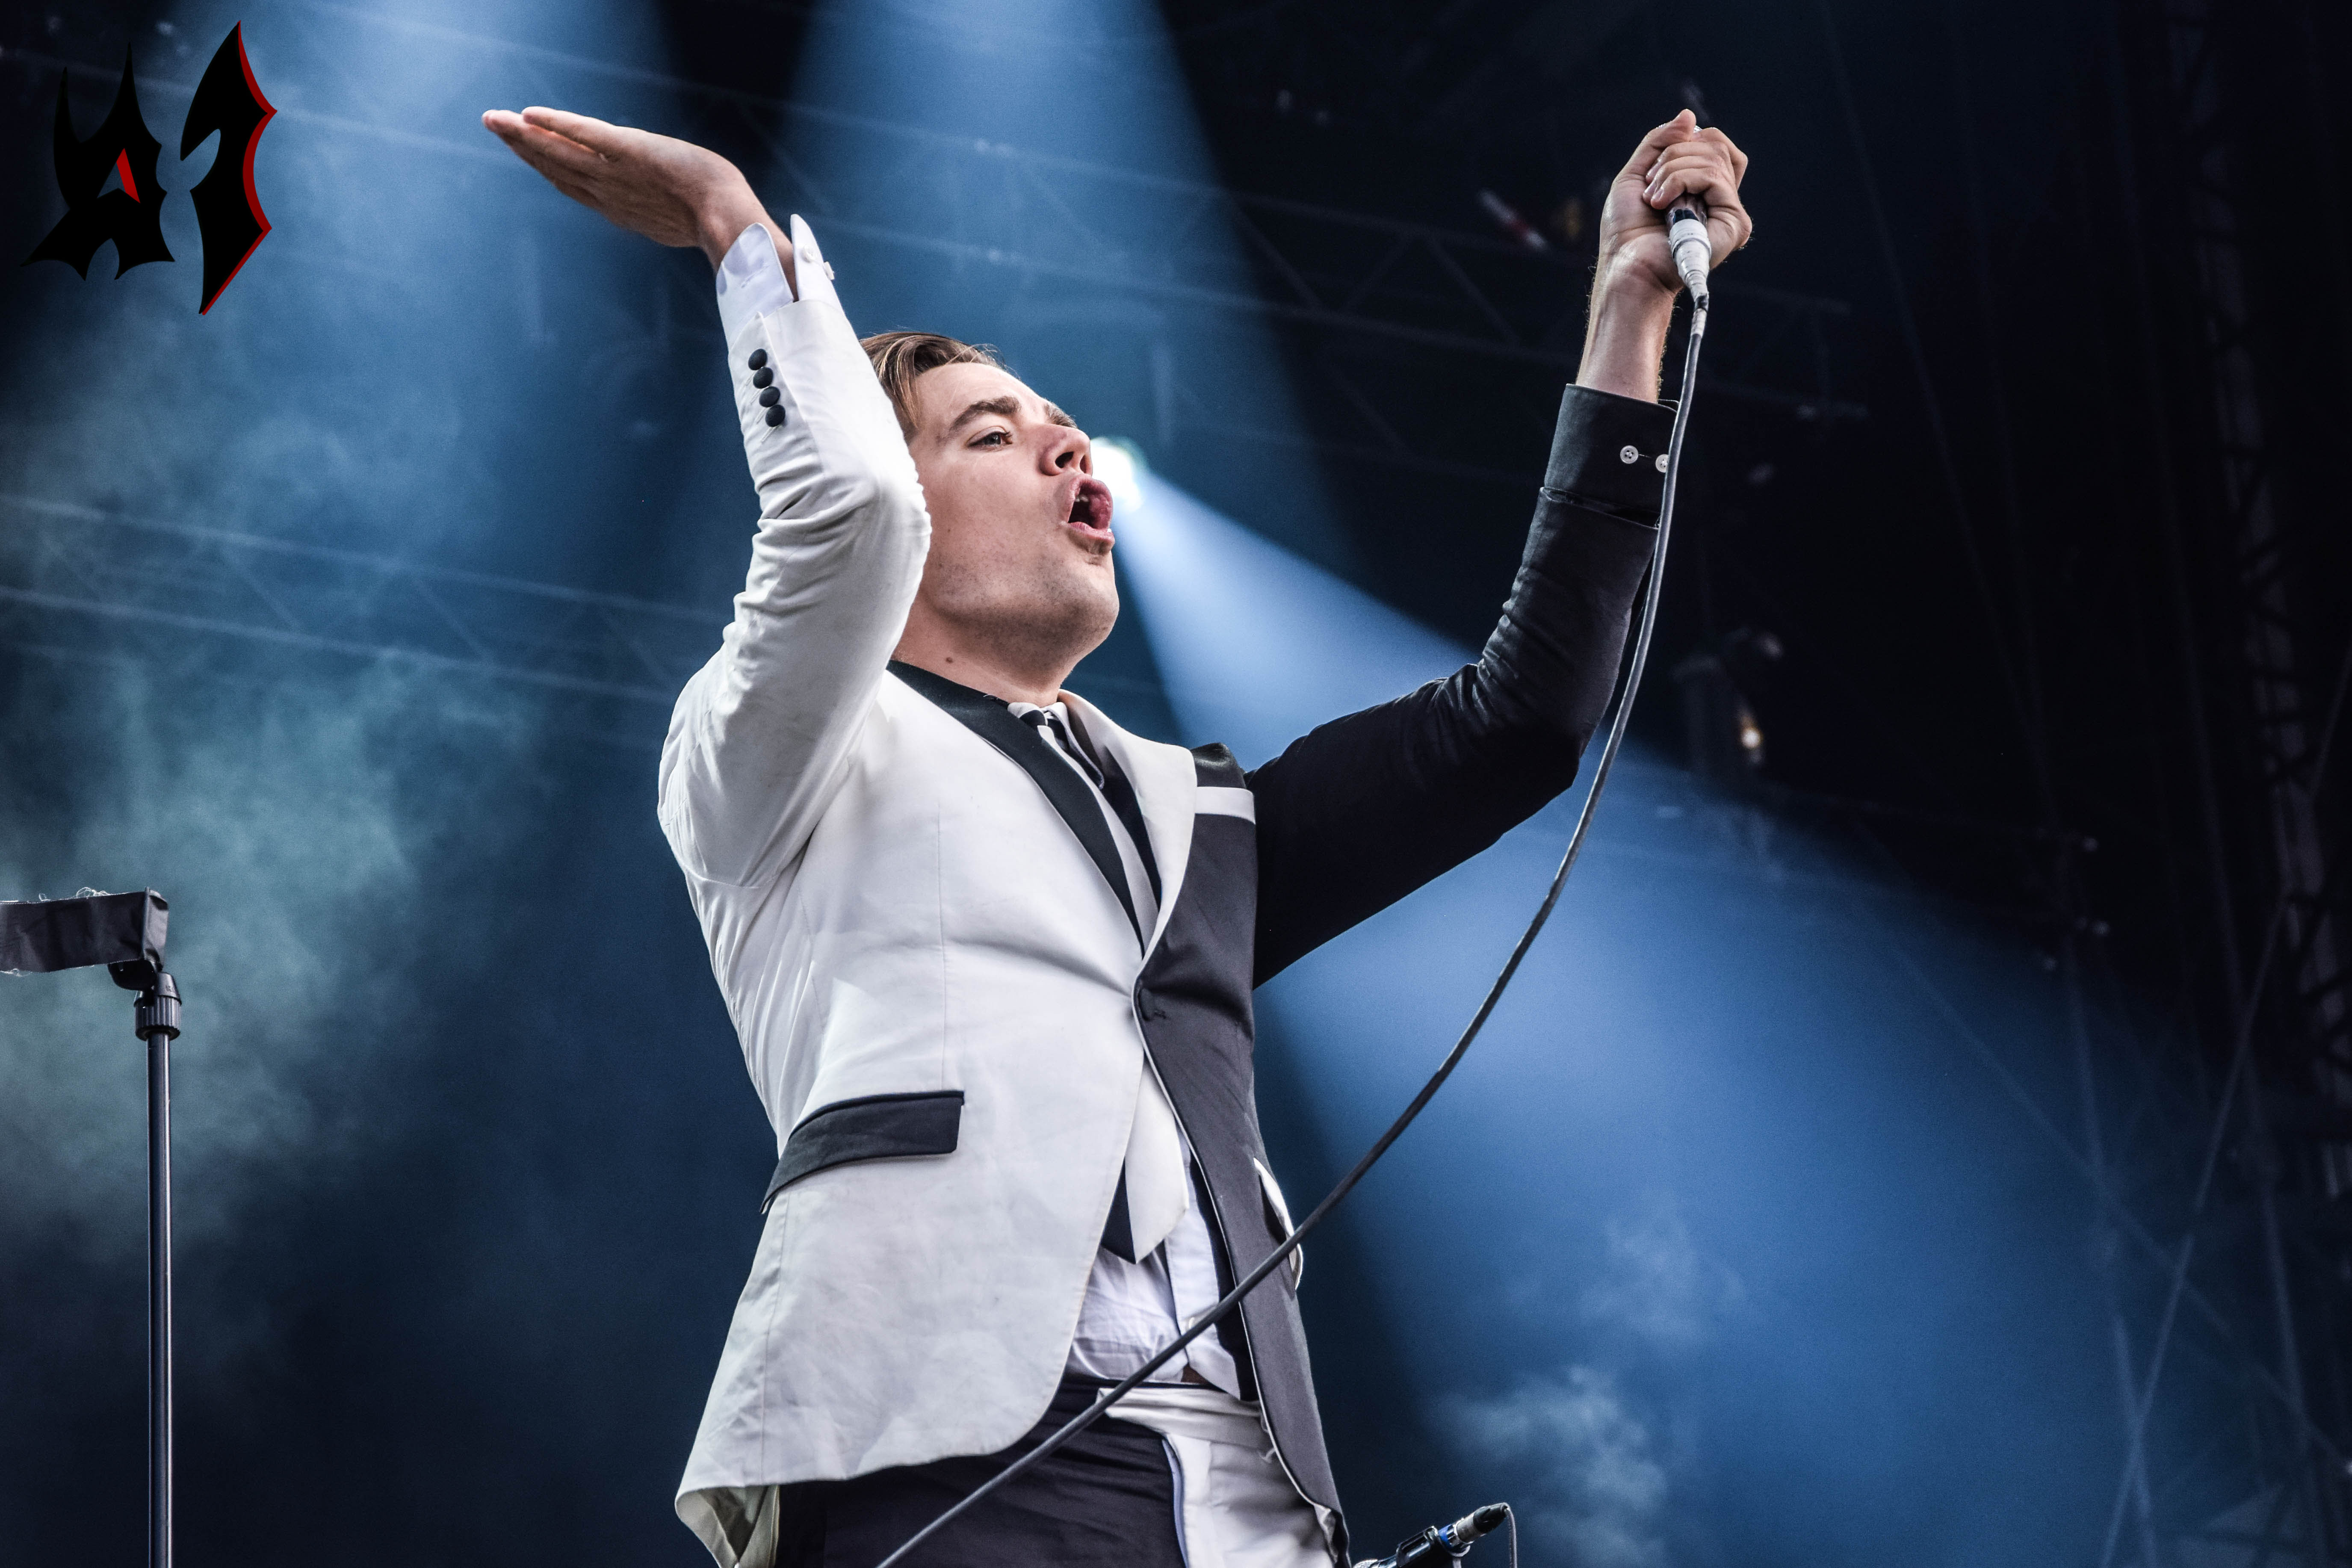 Donwload 2018 – Day 3 - The Hives 7